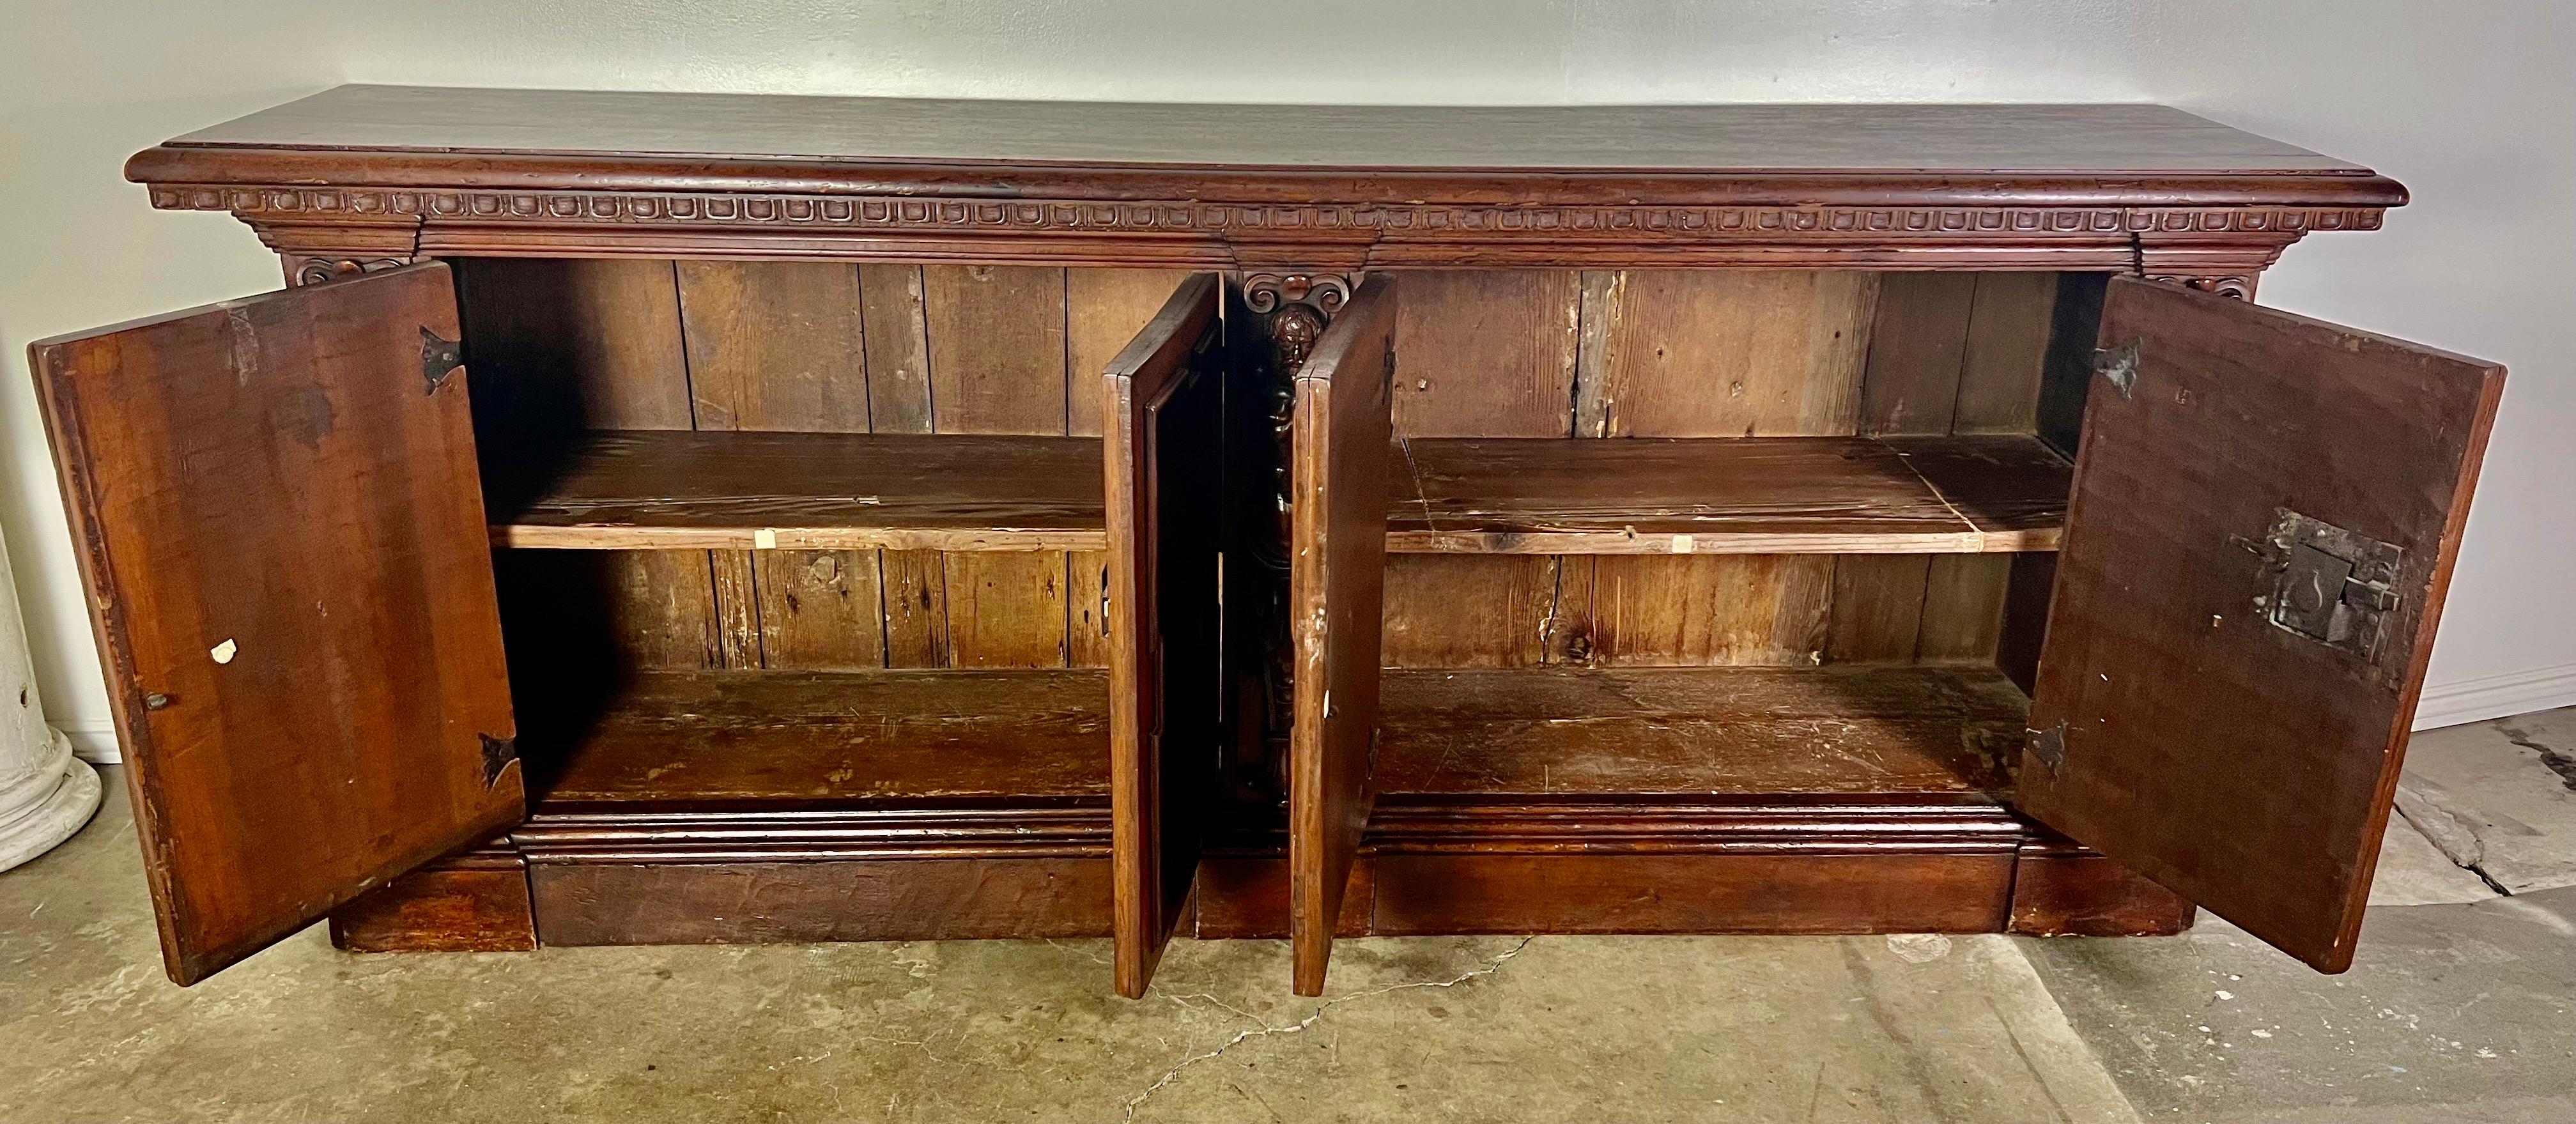 19th Century Walnut Italian Credenza with Intricate Carving Throughout 5